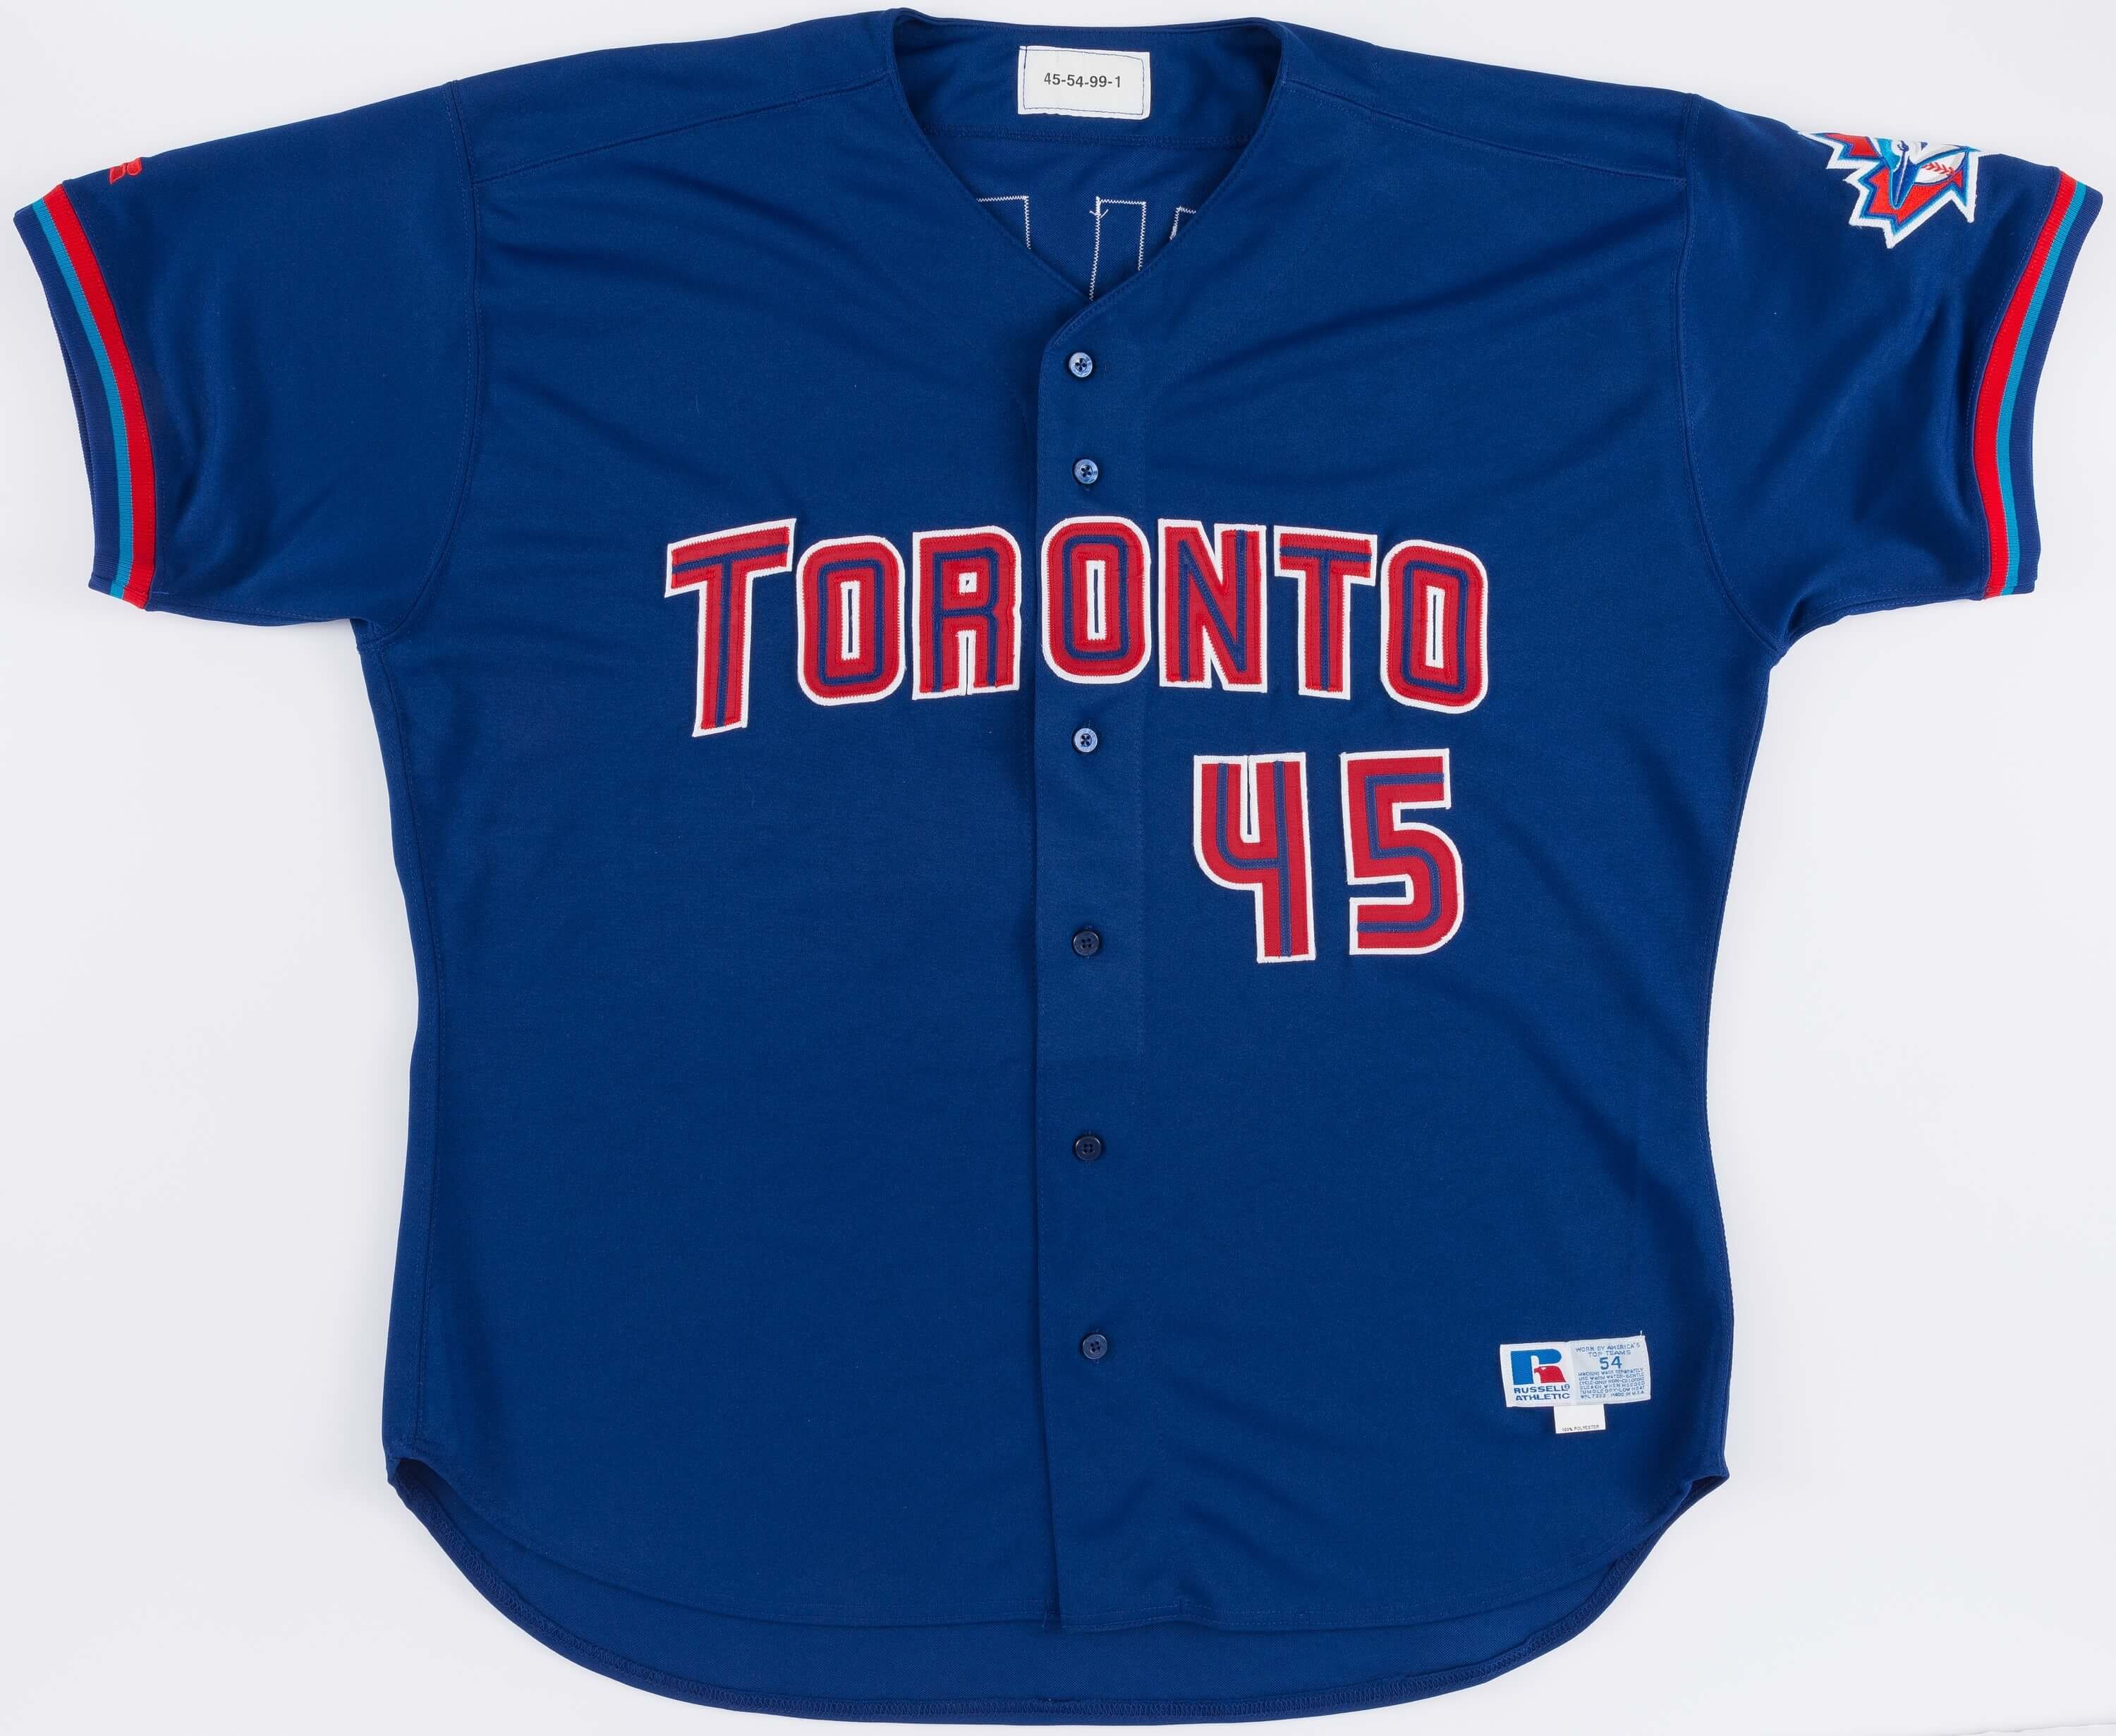 Bid now on game-used jerseys from your - Toronto Blue Jays